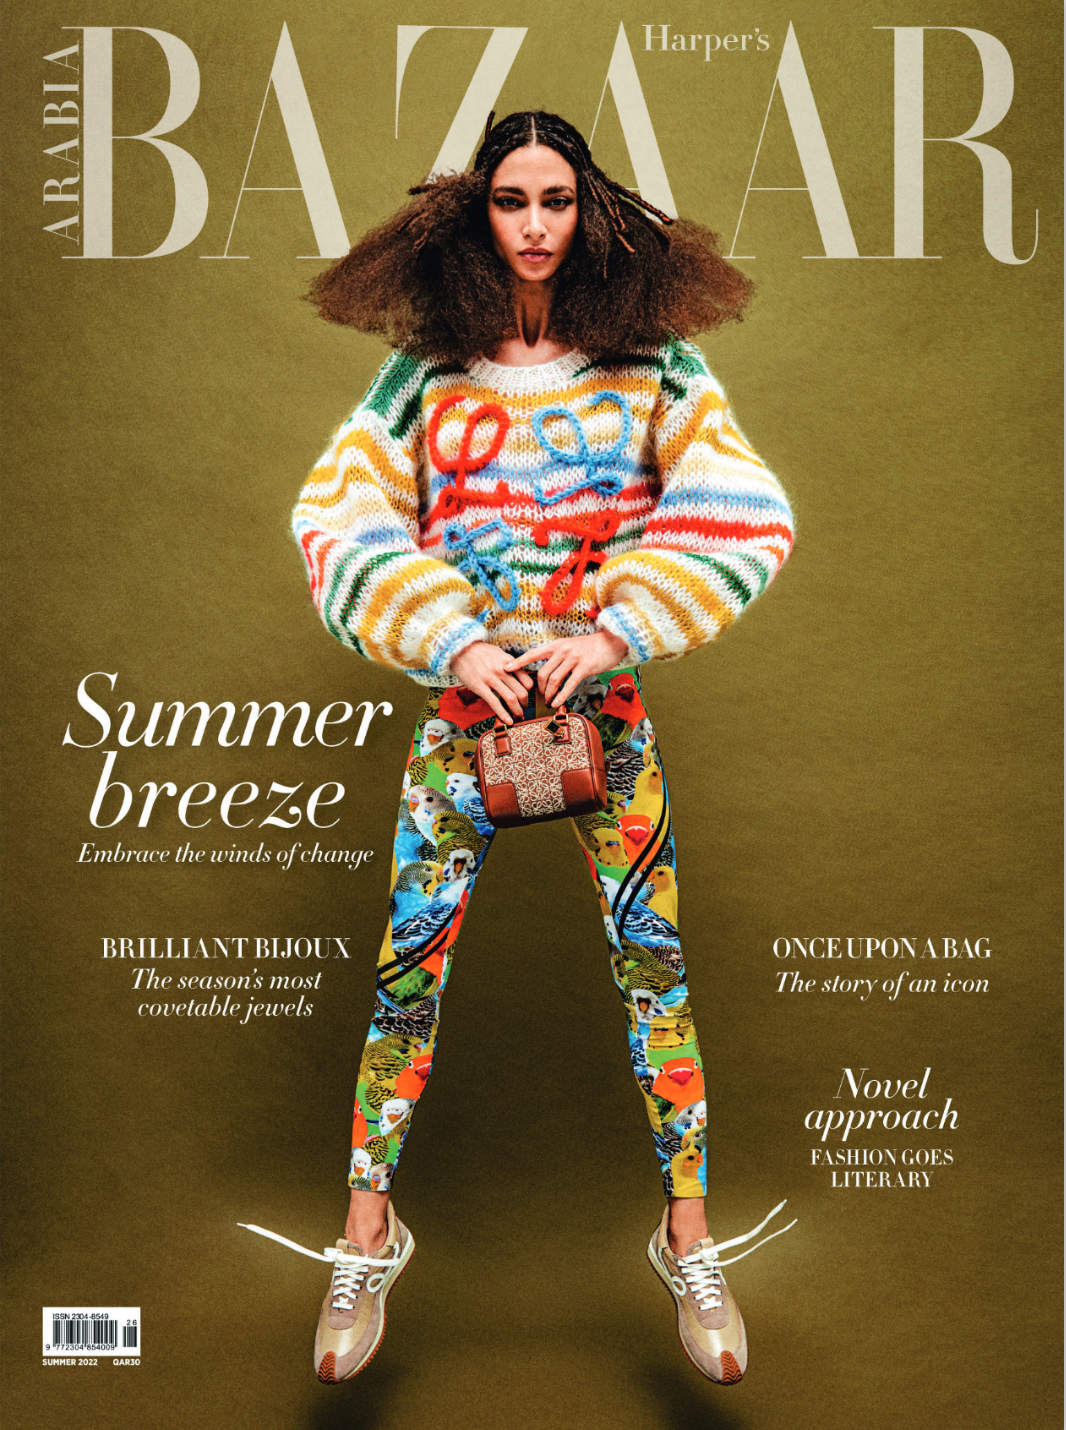 Summer Edition of Harpers Bazaar out now!